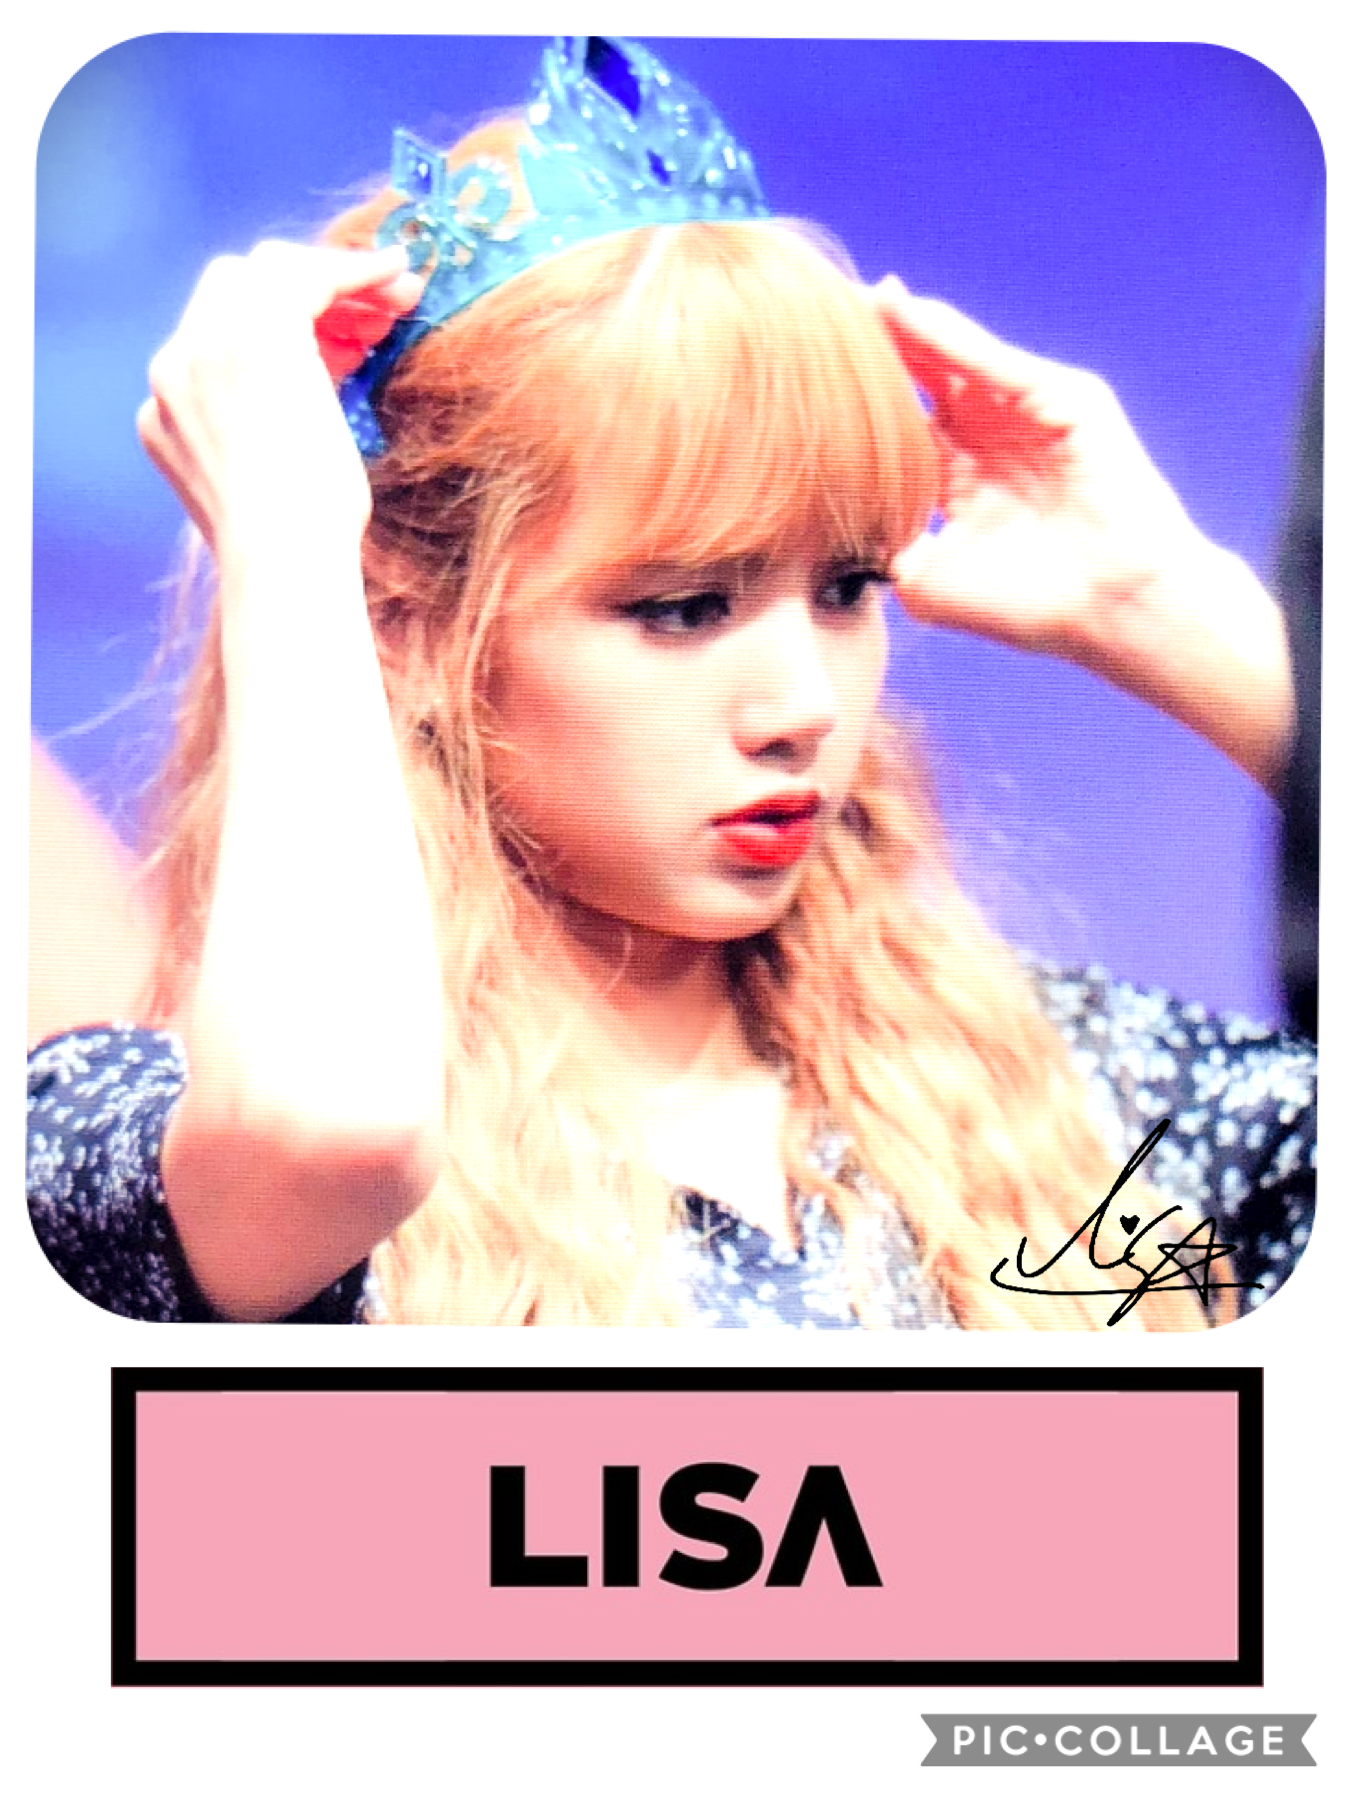 To all people biased on Lisa, give this collage ;)